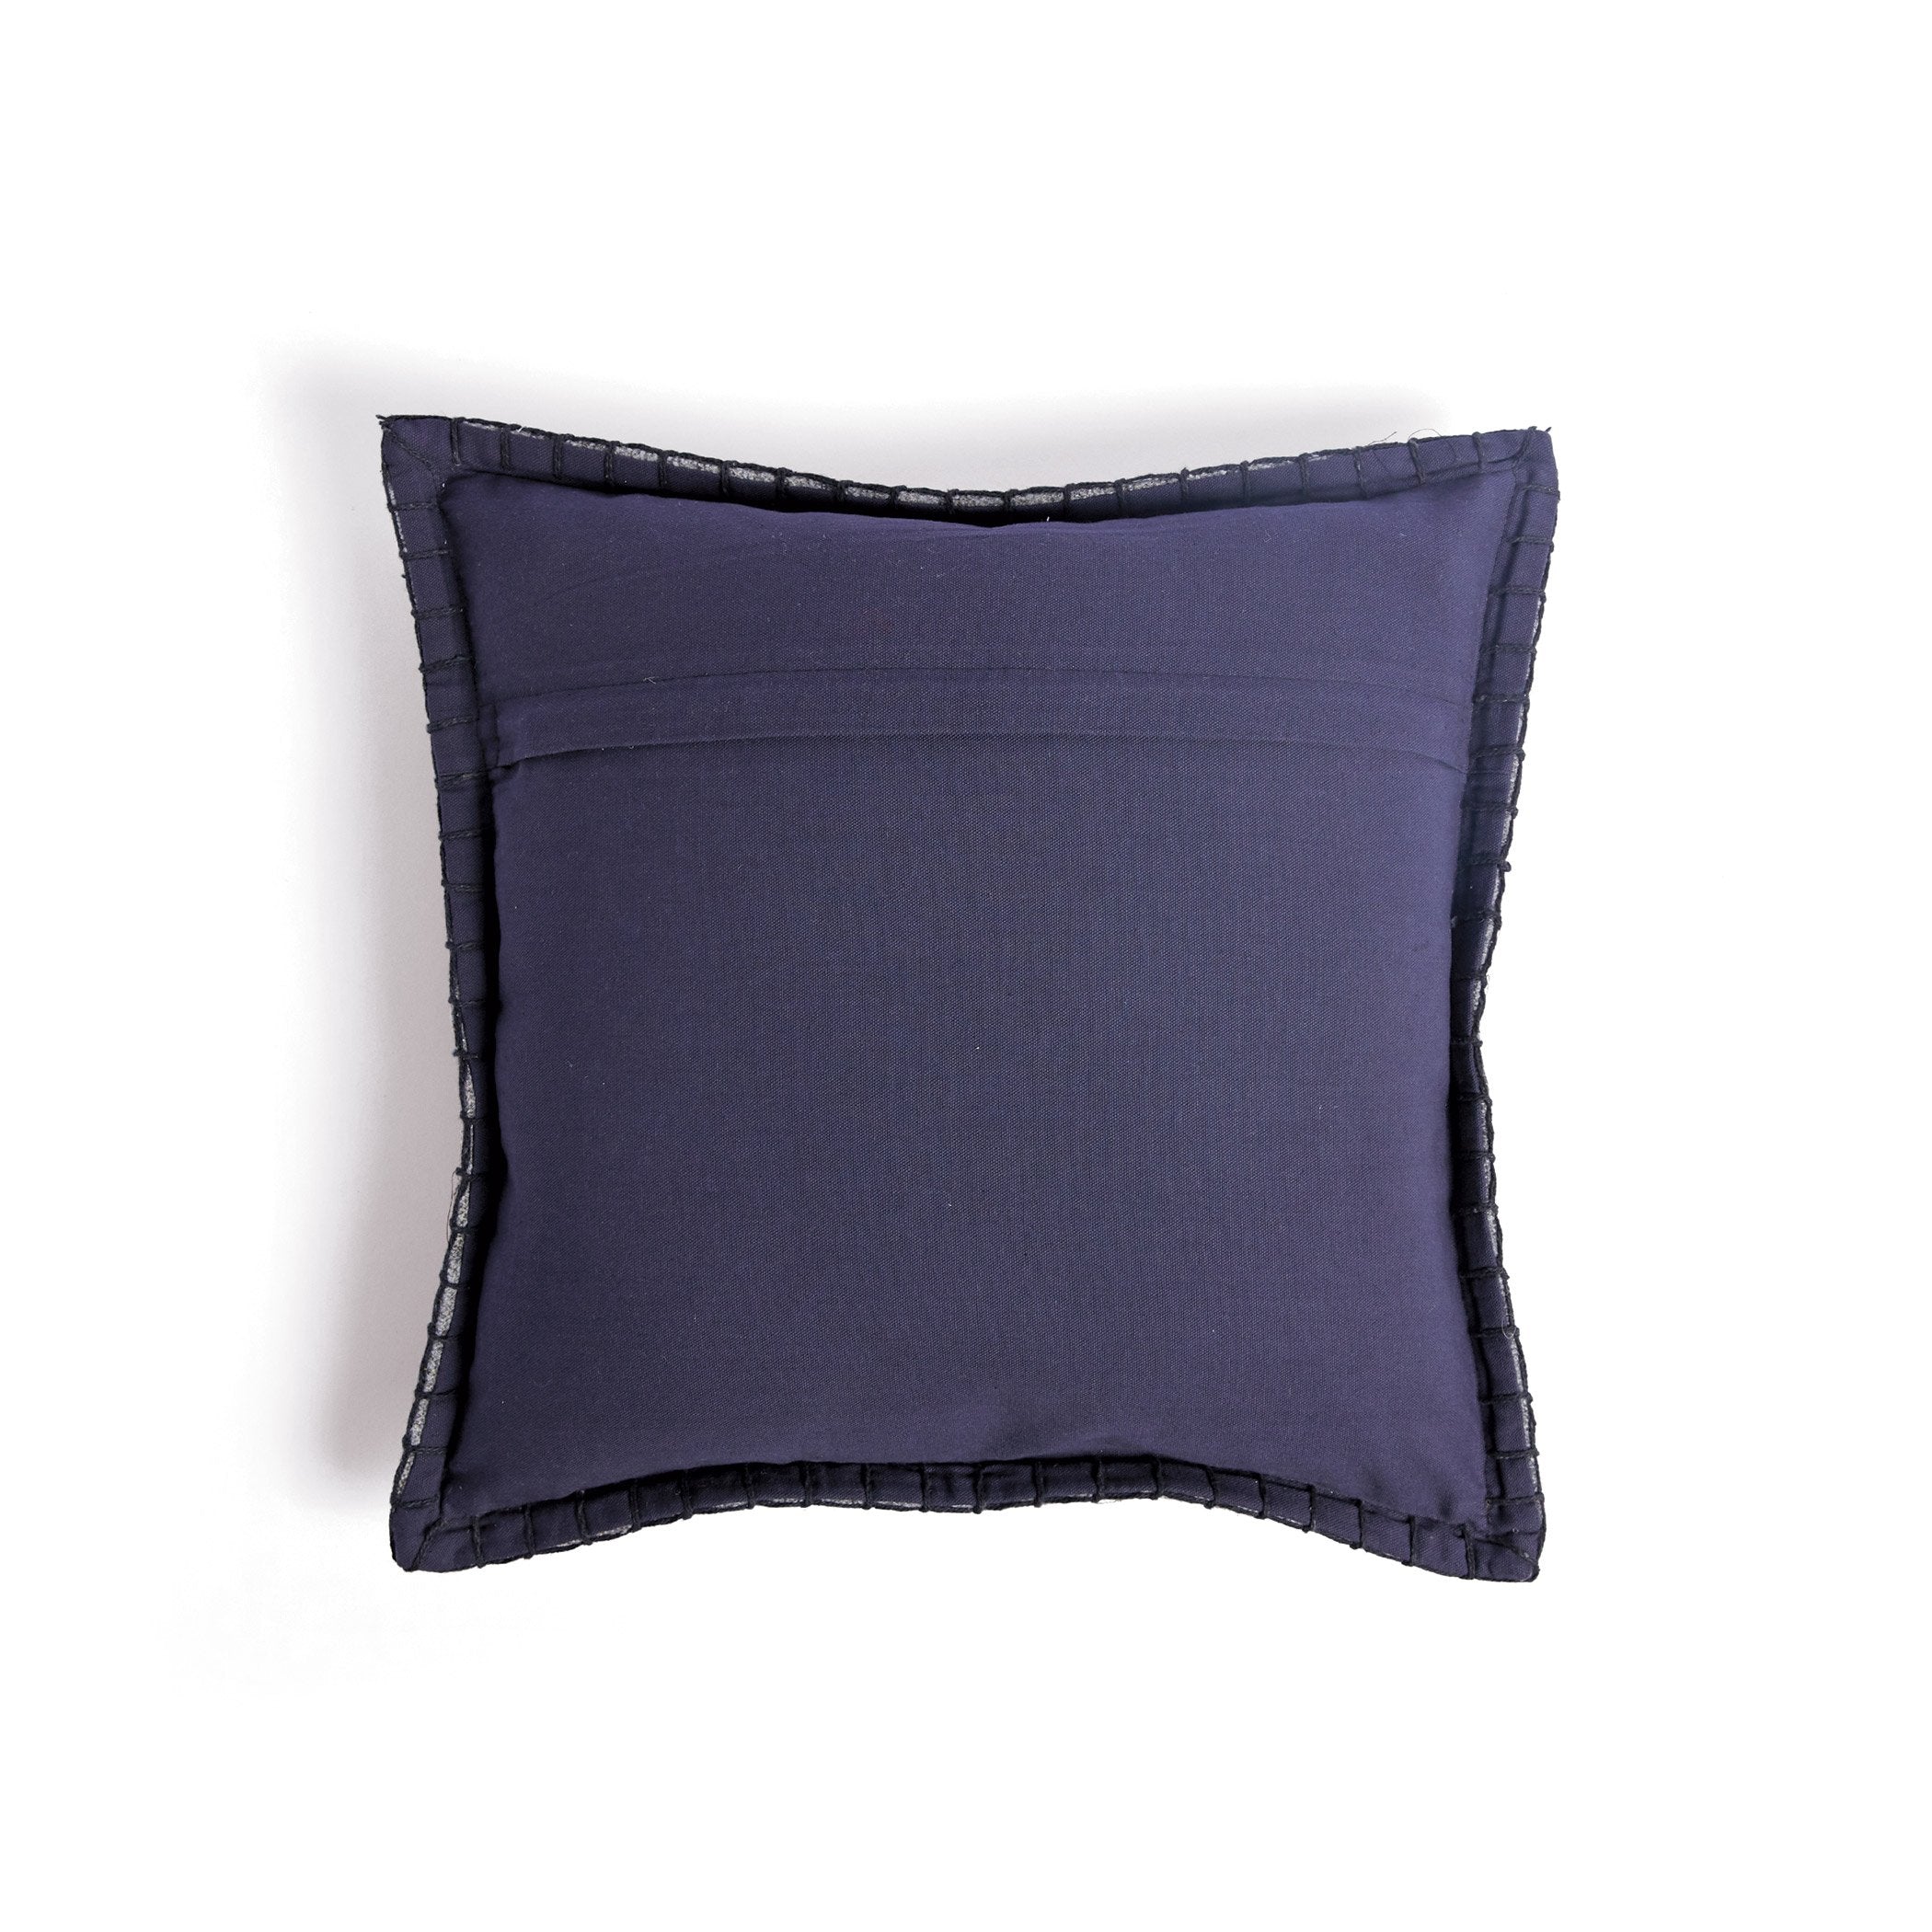 Midtown Pillow by Go Home, Ltd.